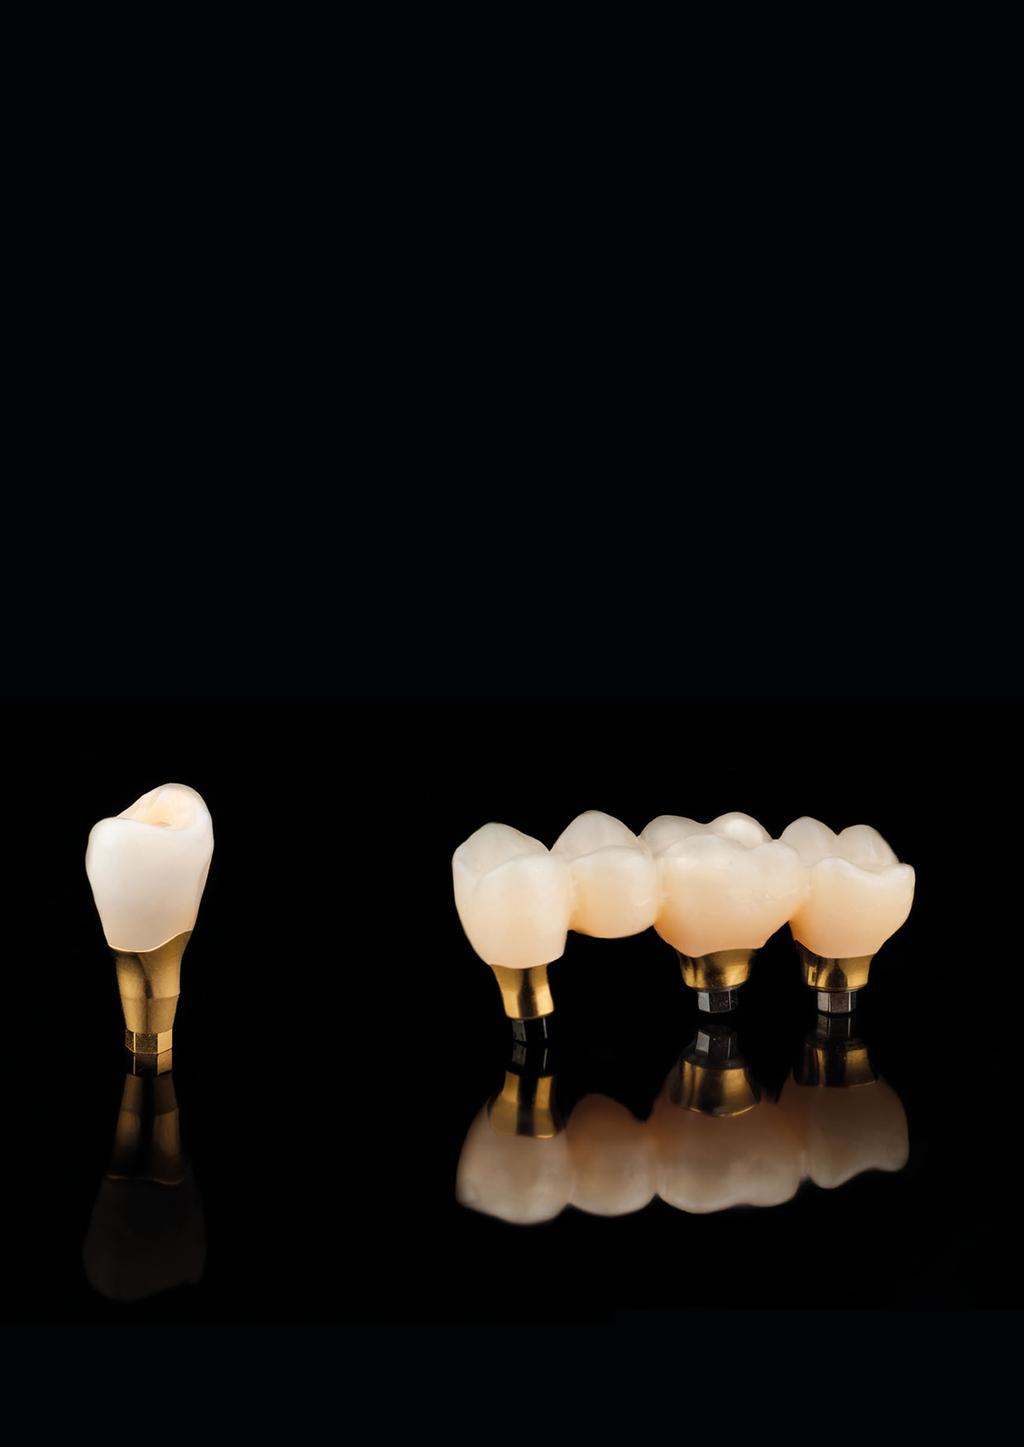 ZIRCONIA CUSTOMIZED ABUTMENTS OTHER MATERIALS CERAMICS, COMPOSITE AND PEEK High aesthetic cemented restoration on customized